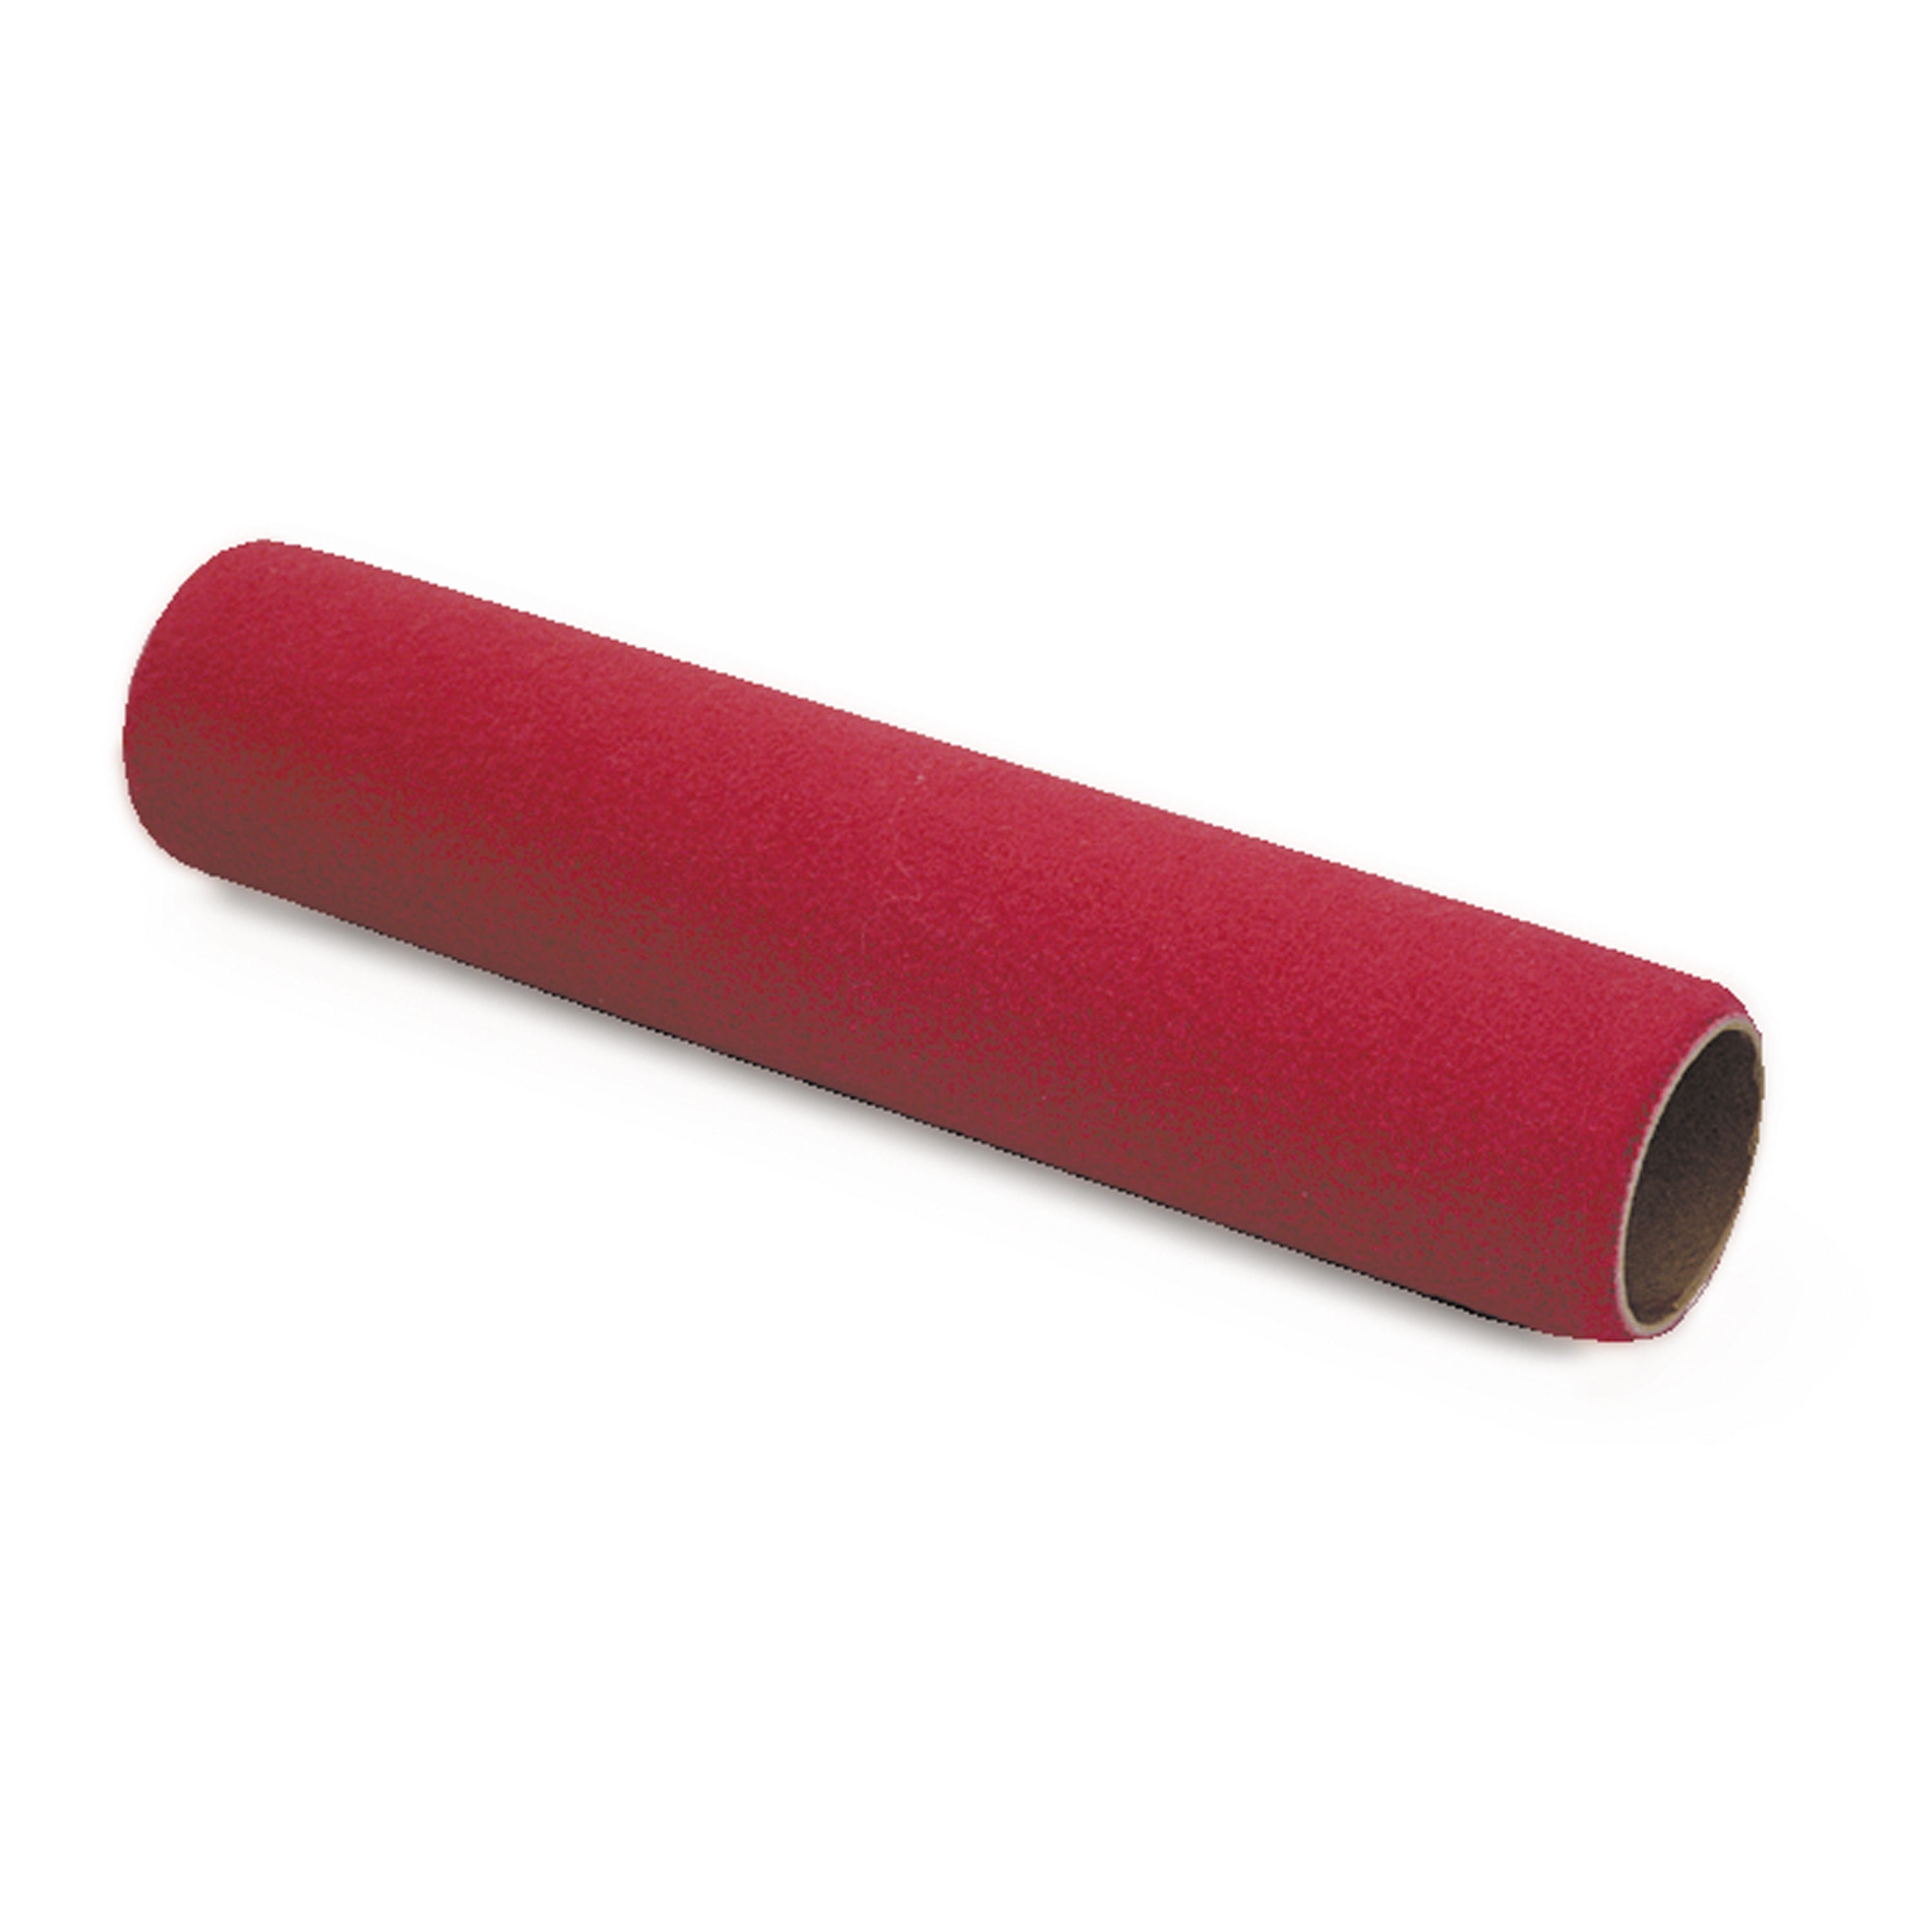 Redtree Industries 27113 Deluxe Red Mohair Paint Roller Cover - 7"